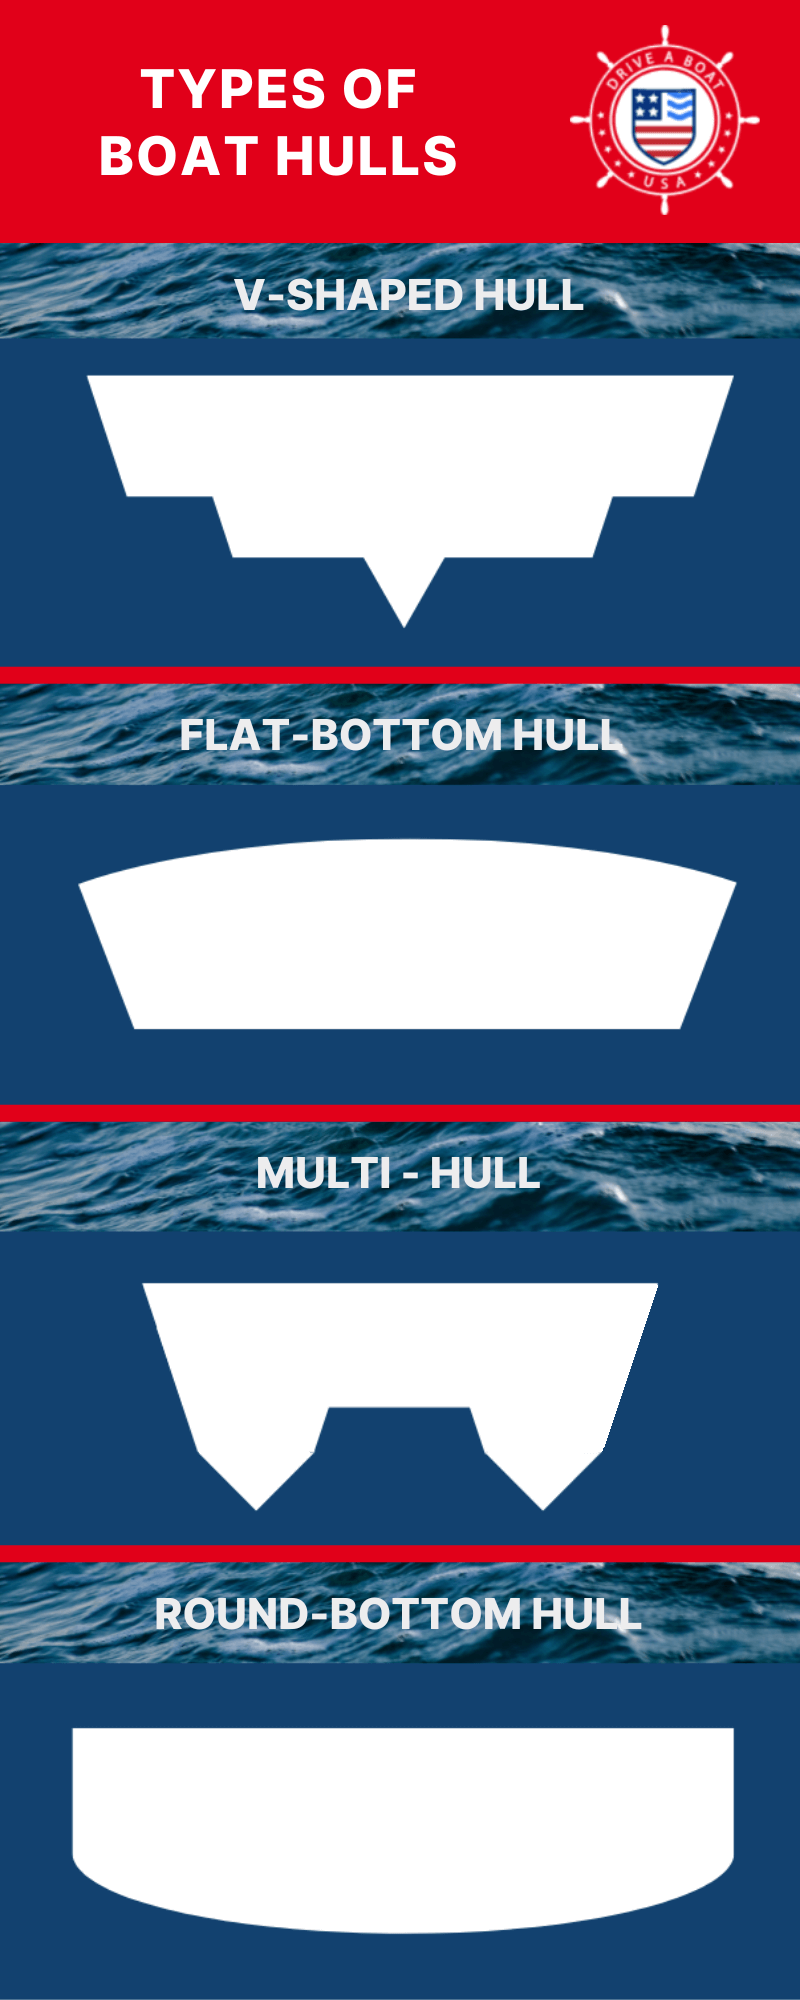 Types of Boat Hulls Infographic